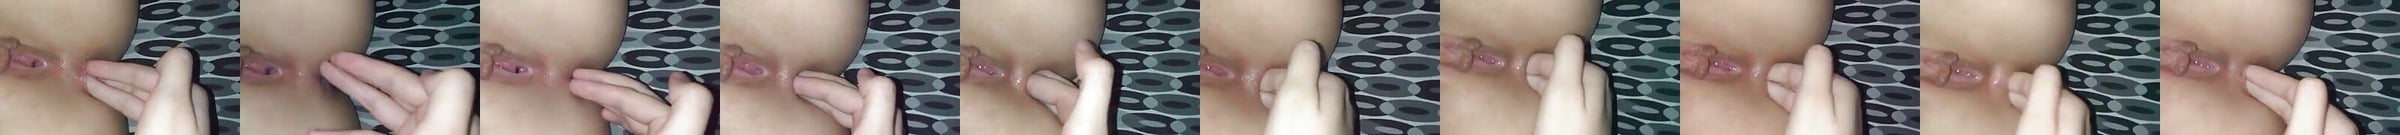 Beautiful Girl Making An Anal Snowman With Carrot In Ass XHamster